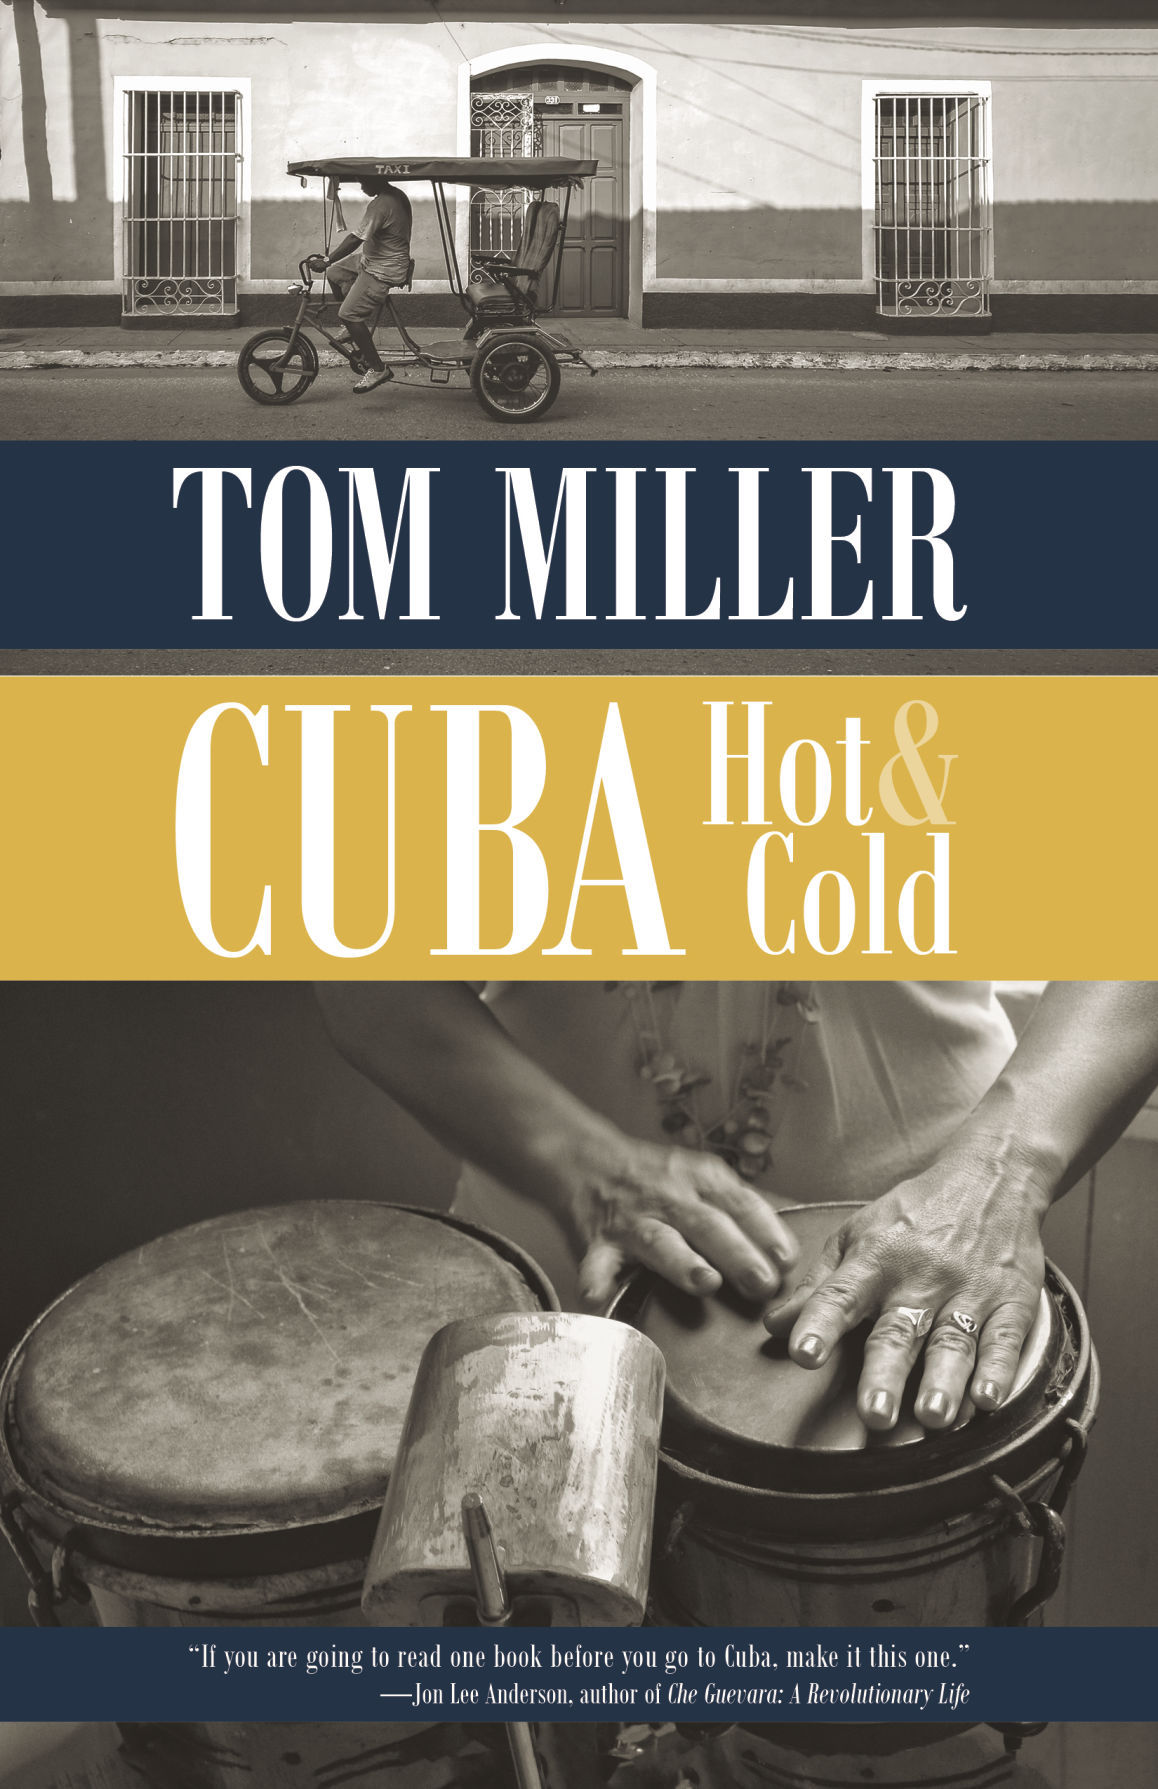 Tom Miller, Cuba Hot and Cold